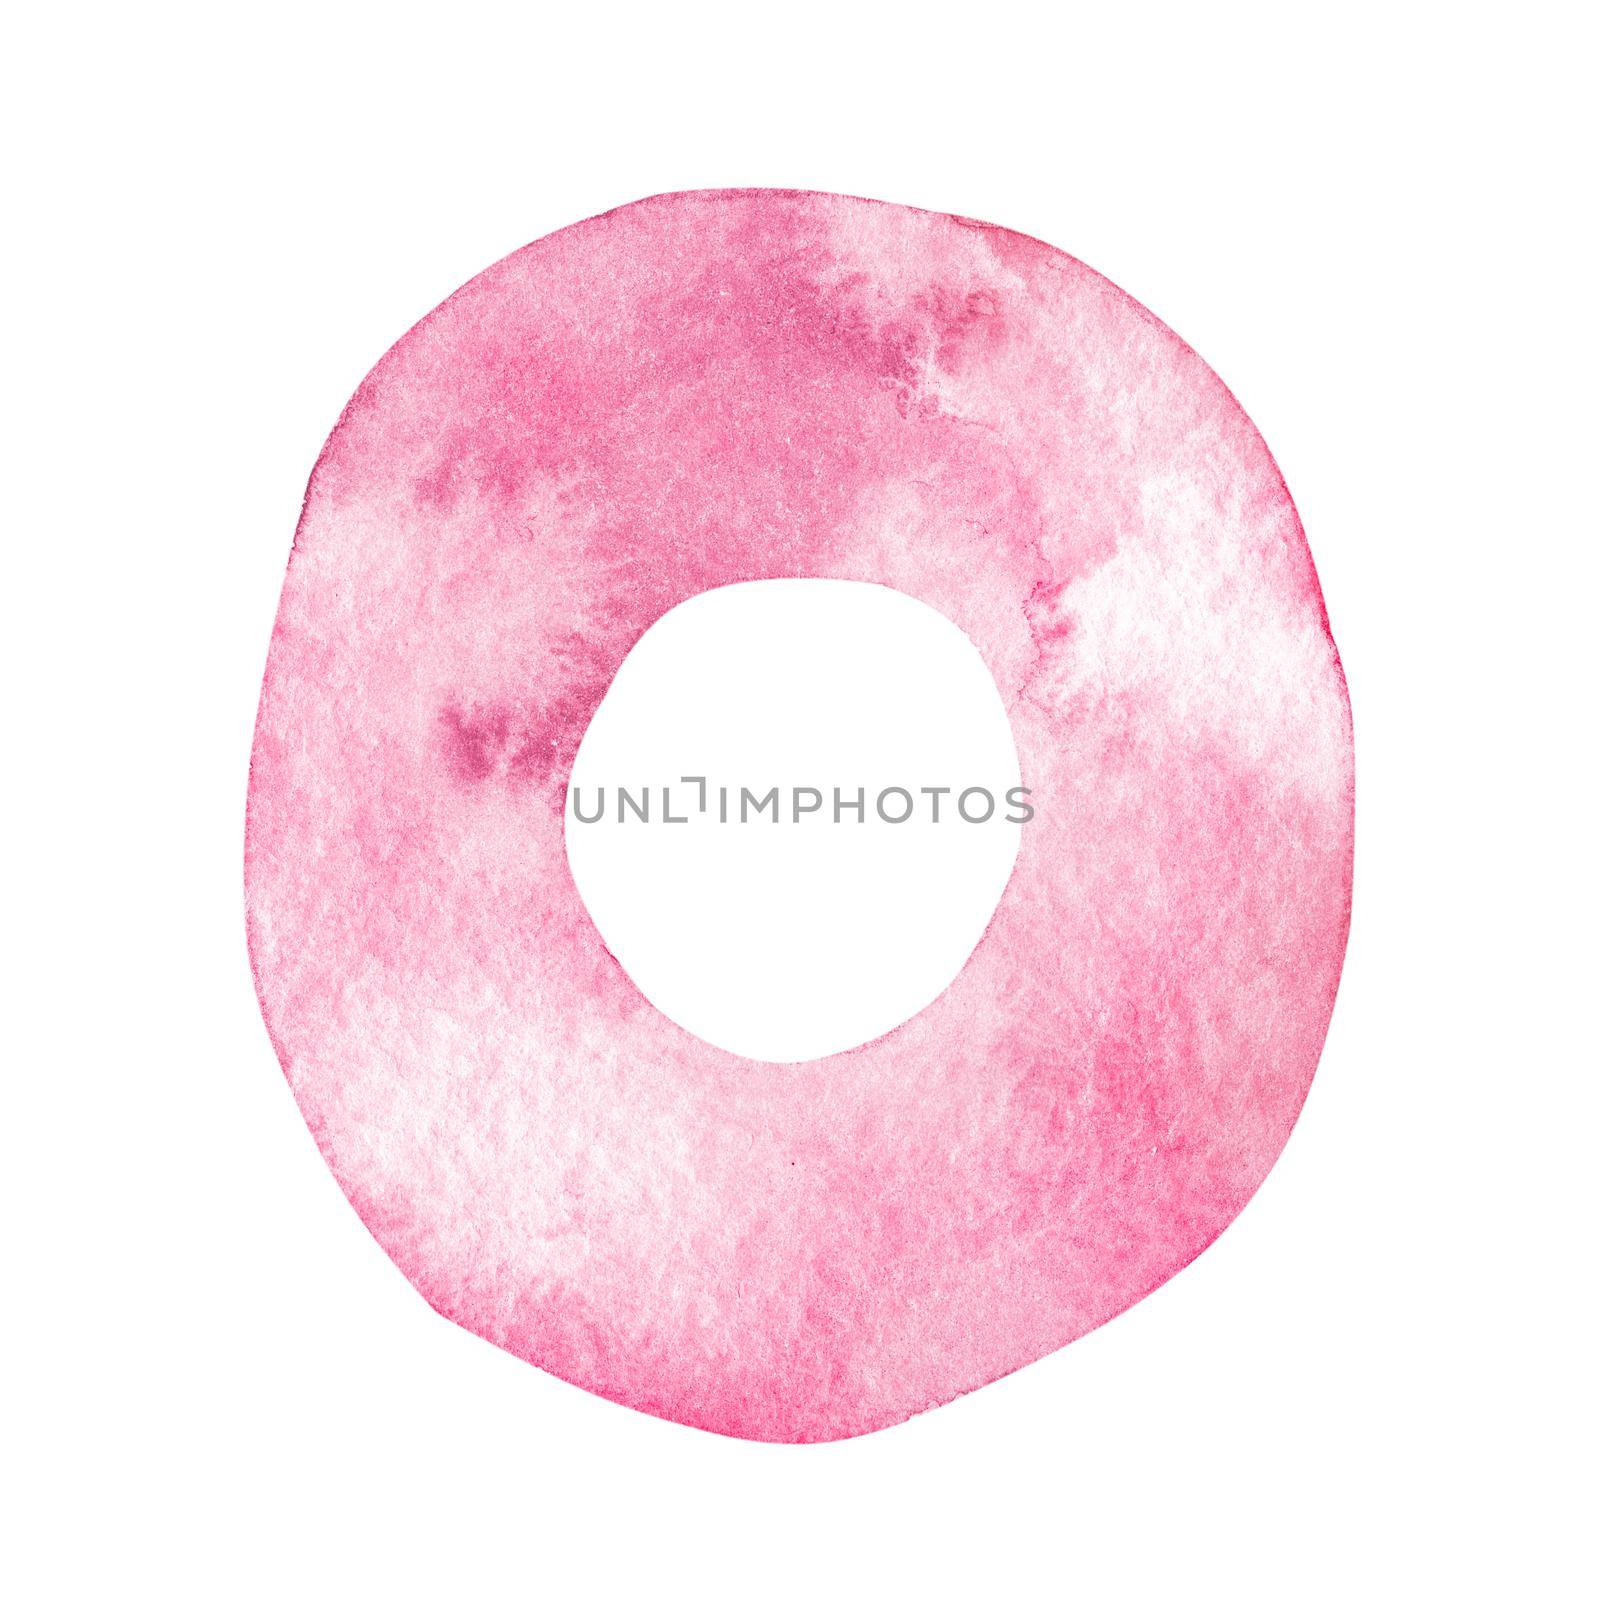 Watercolor pink letter o isolated on white background